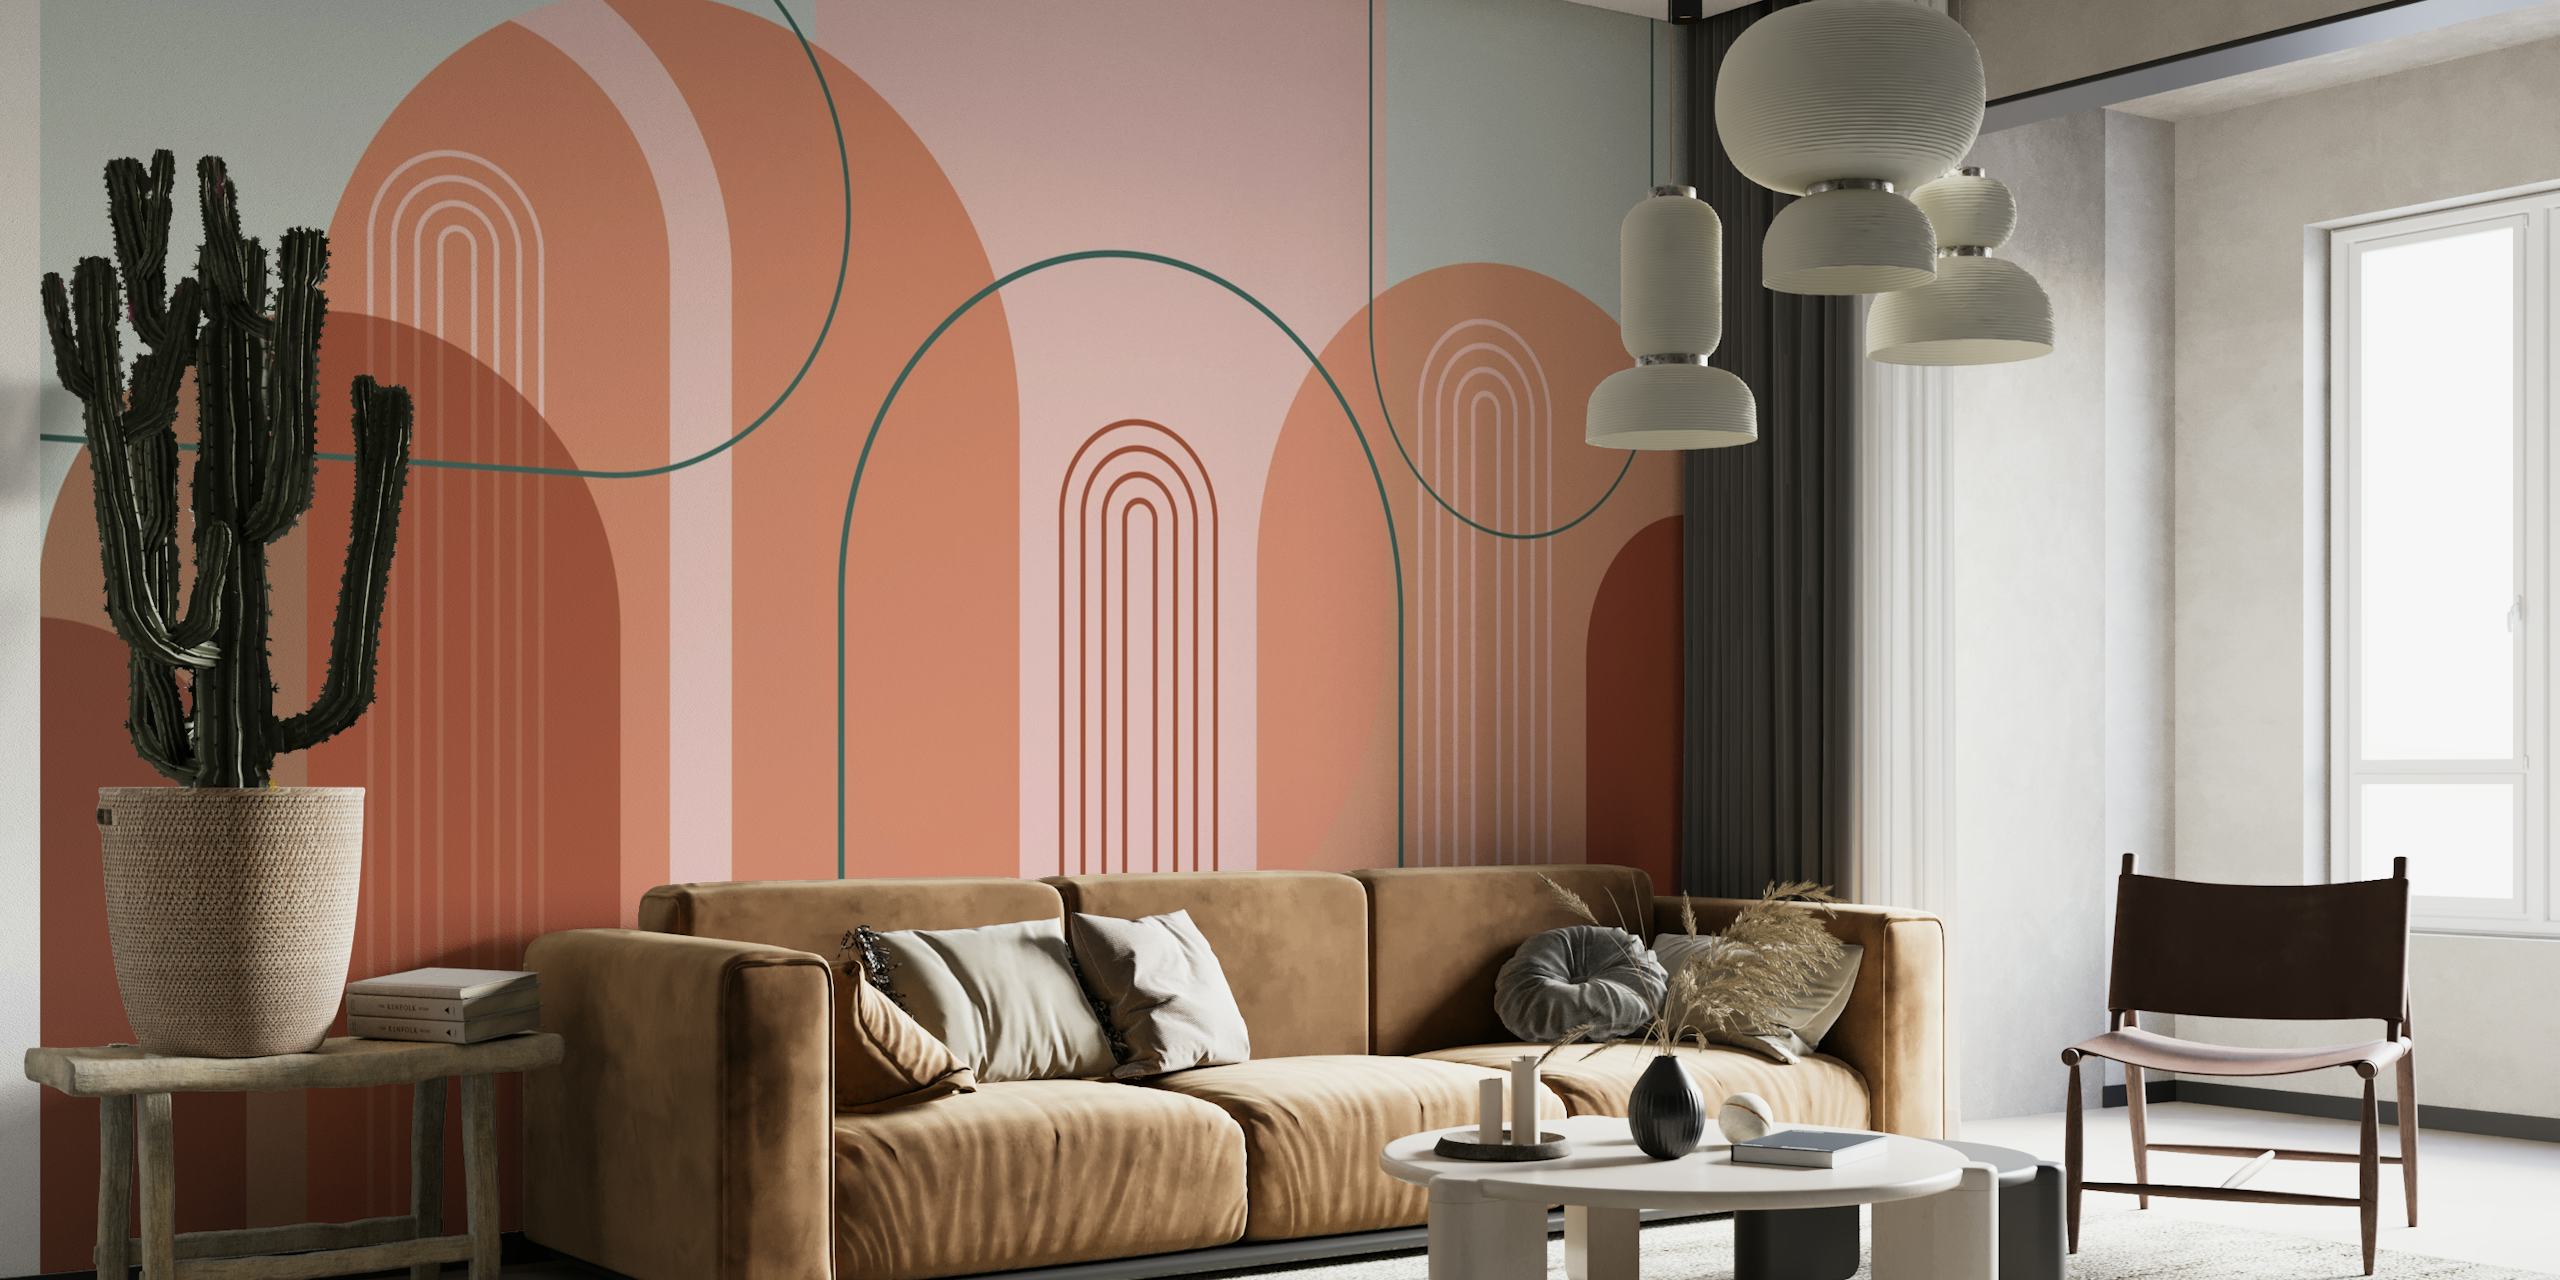 Abstract mid-century modern style wall mural with pastel geometric shapes and arches